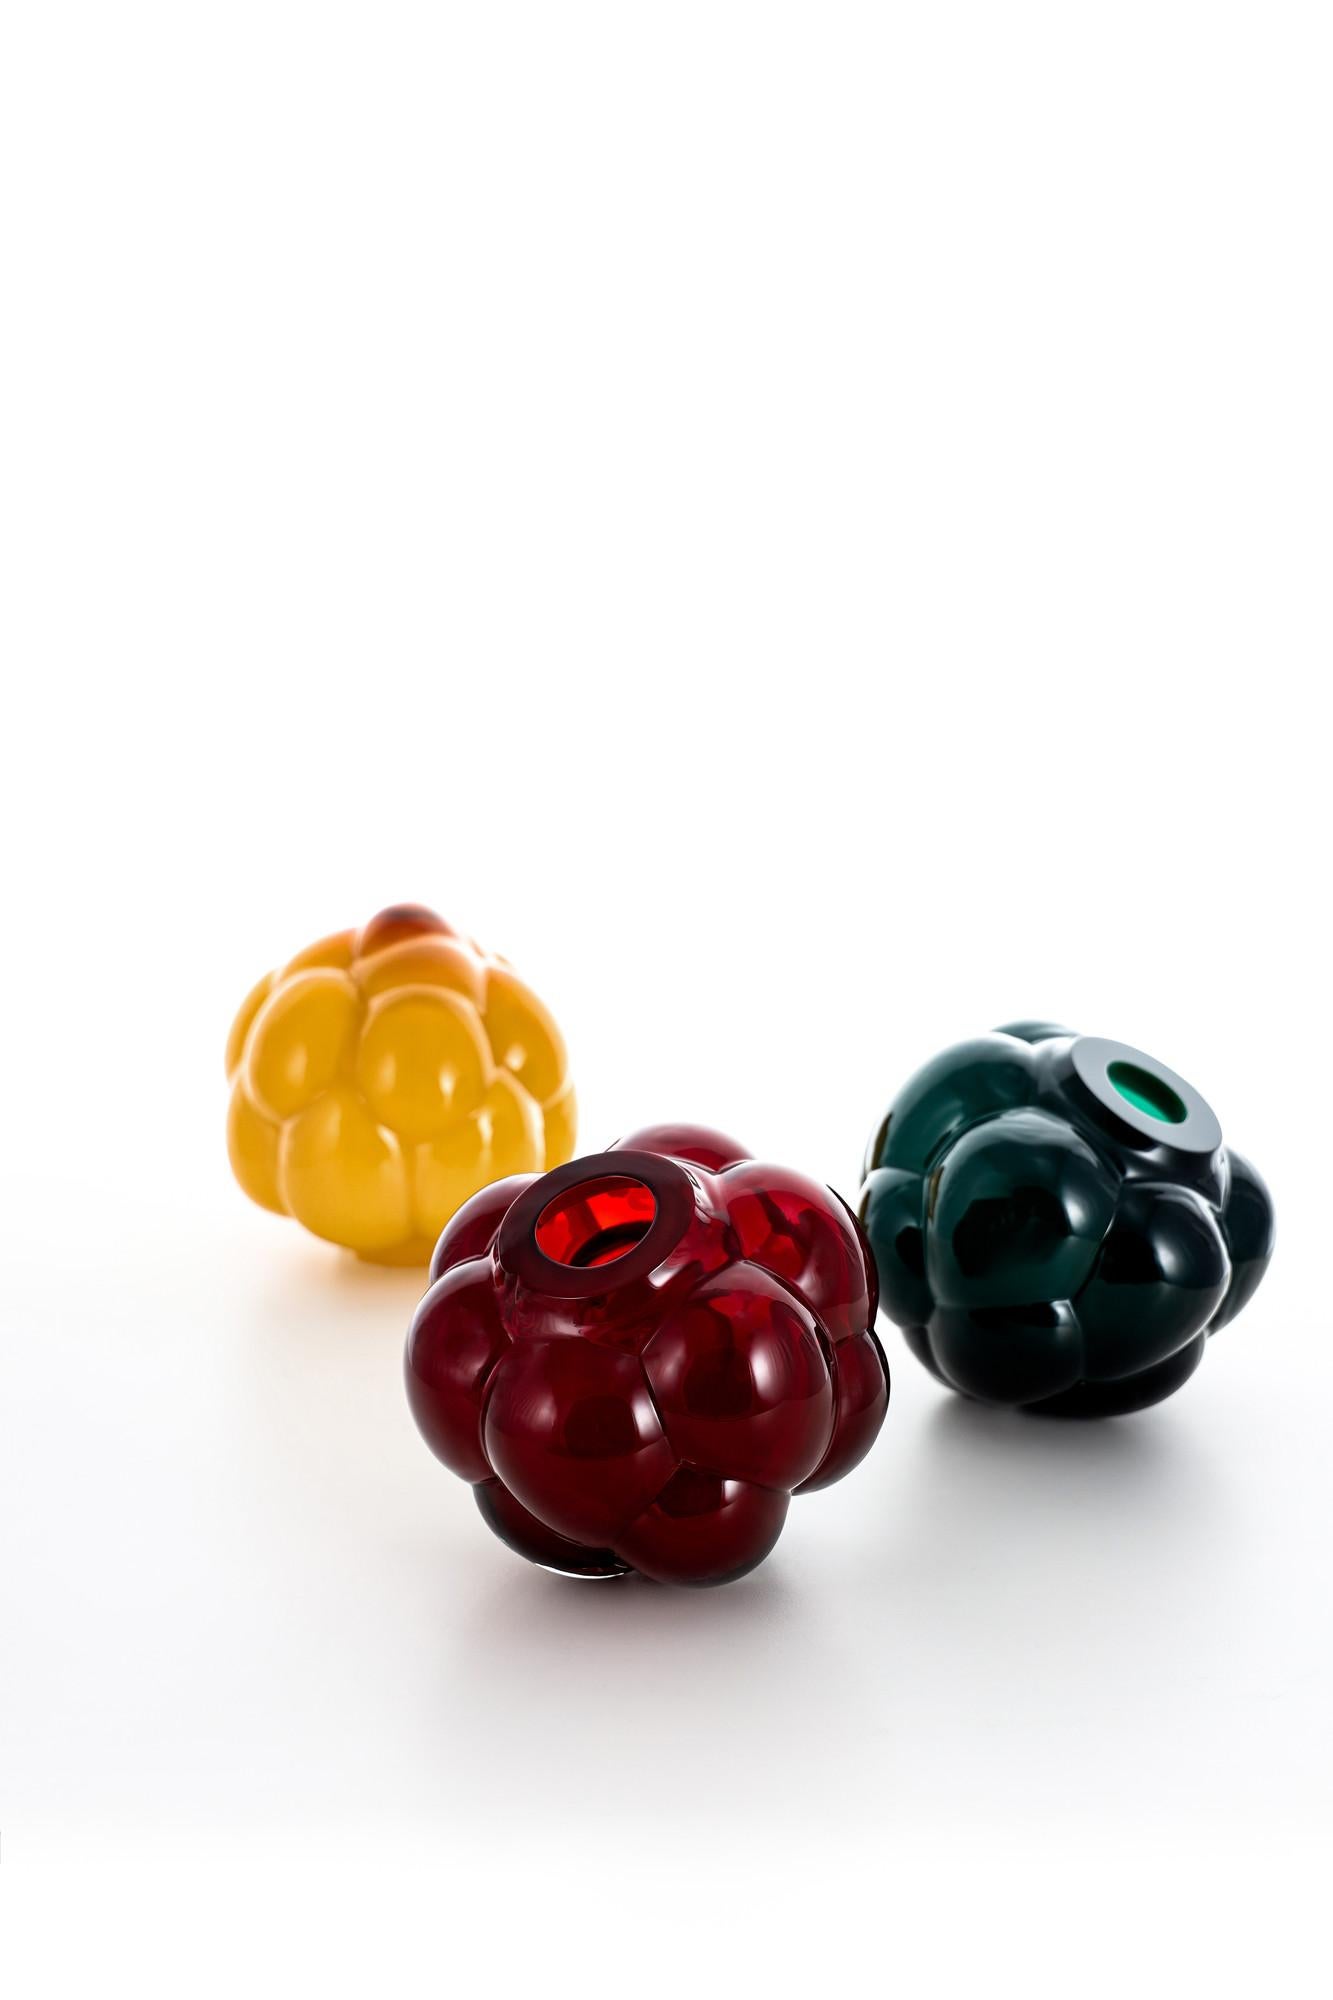 Ellen Ehk Åkesson is a Swedish glass artist who tells stories of the mysterious forest through her art glass, such as Berry Tales – a bubbling, bulbous berry plucked directly from the woodlands in her mind. The object in emerald green is handmade,